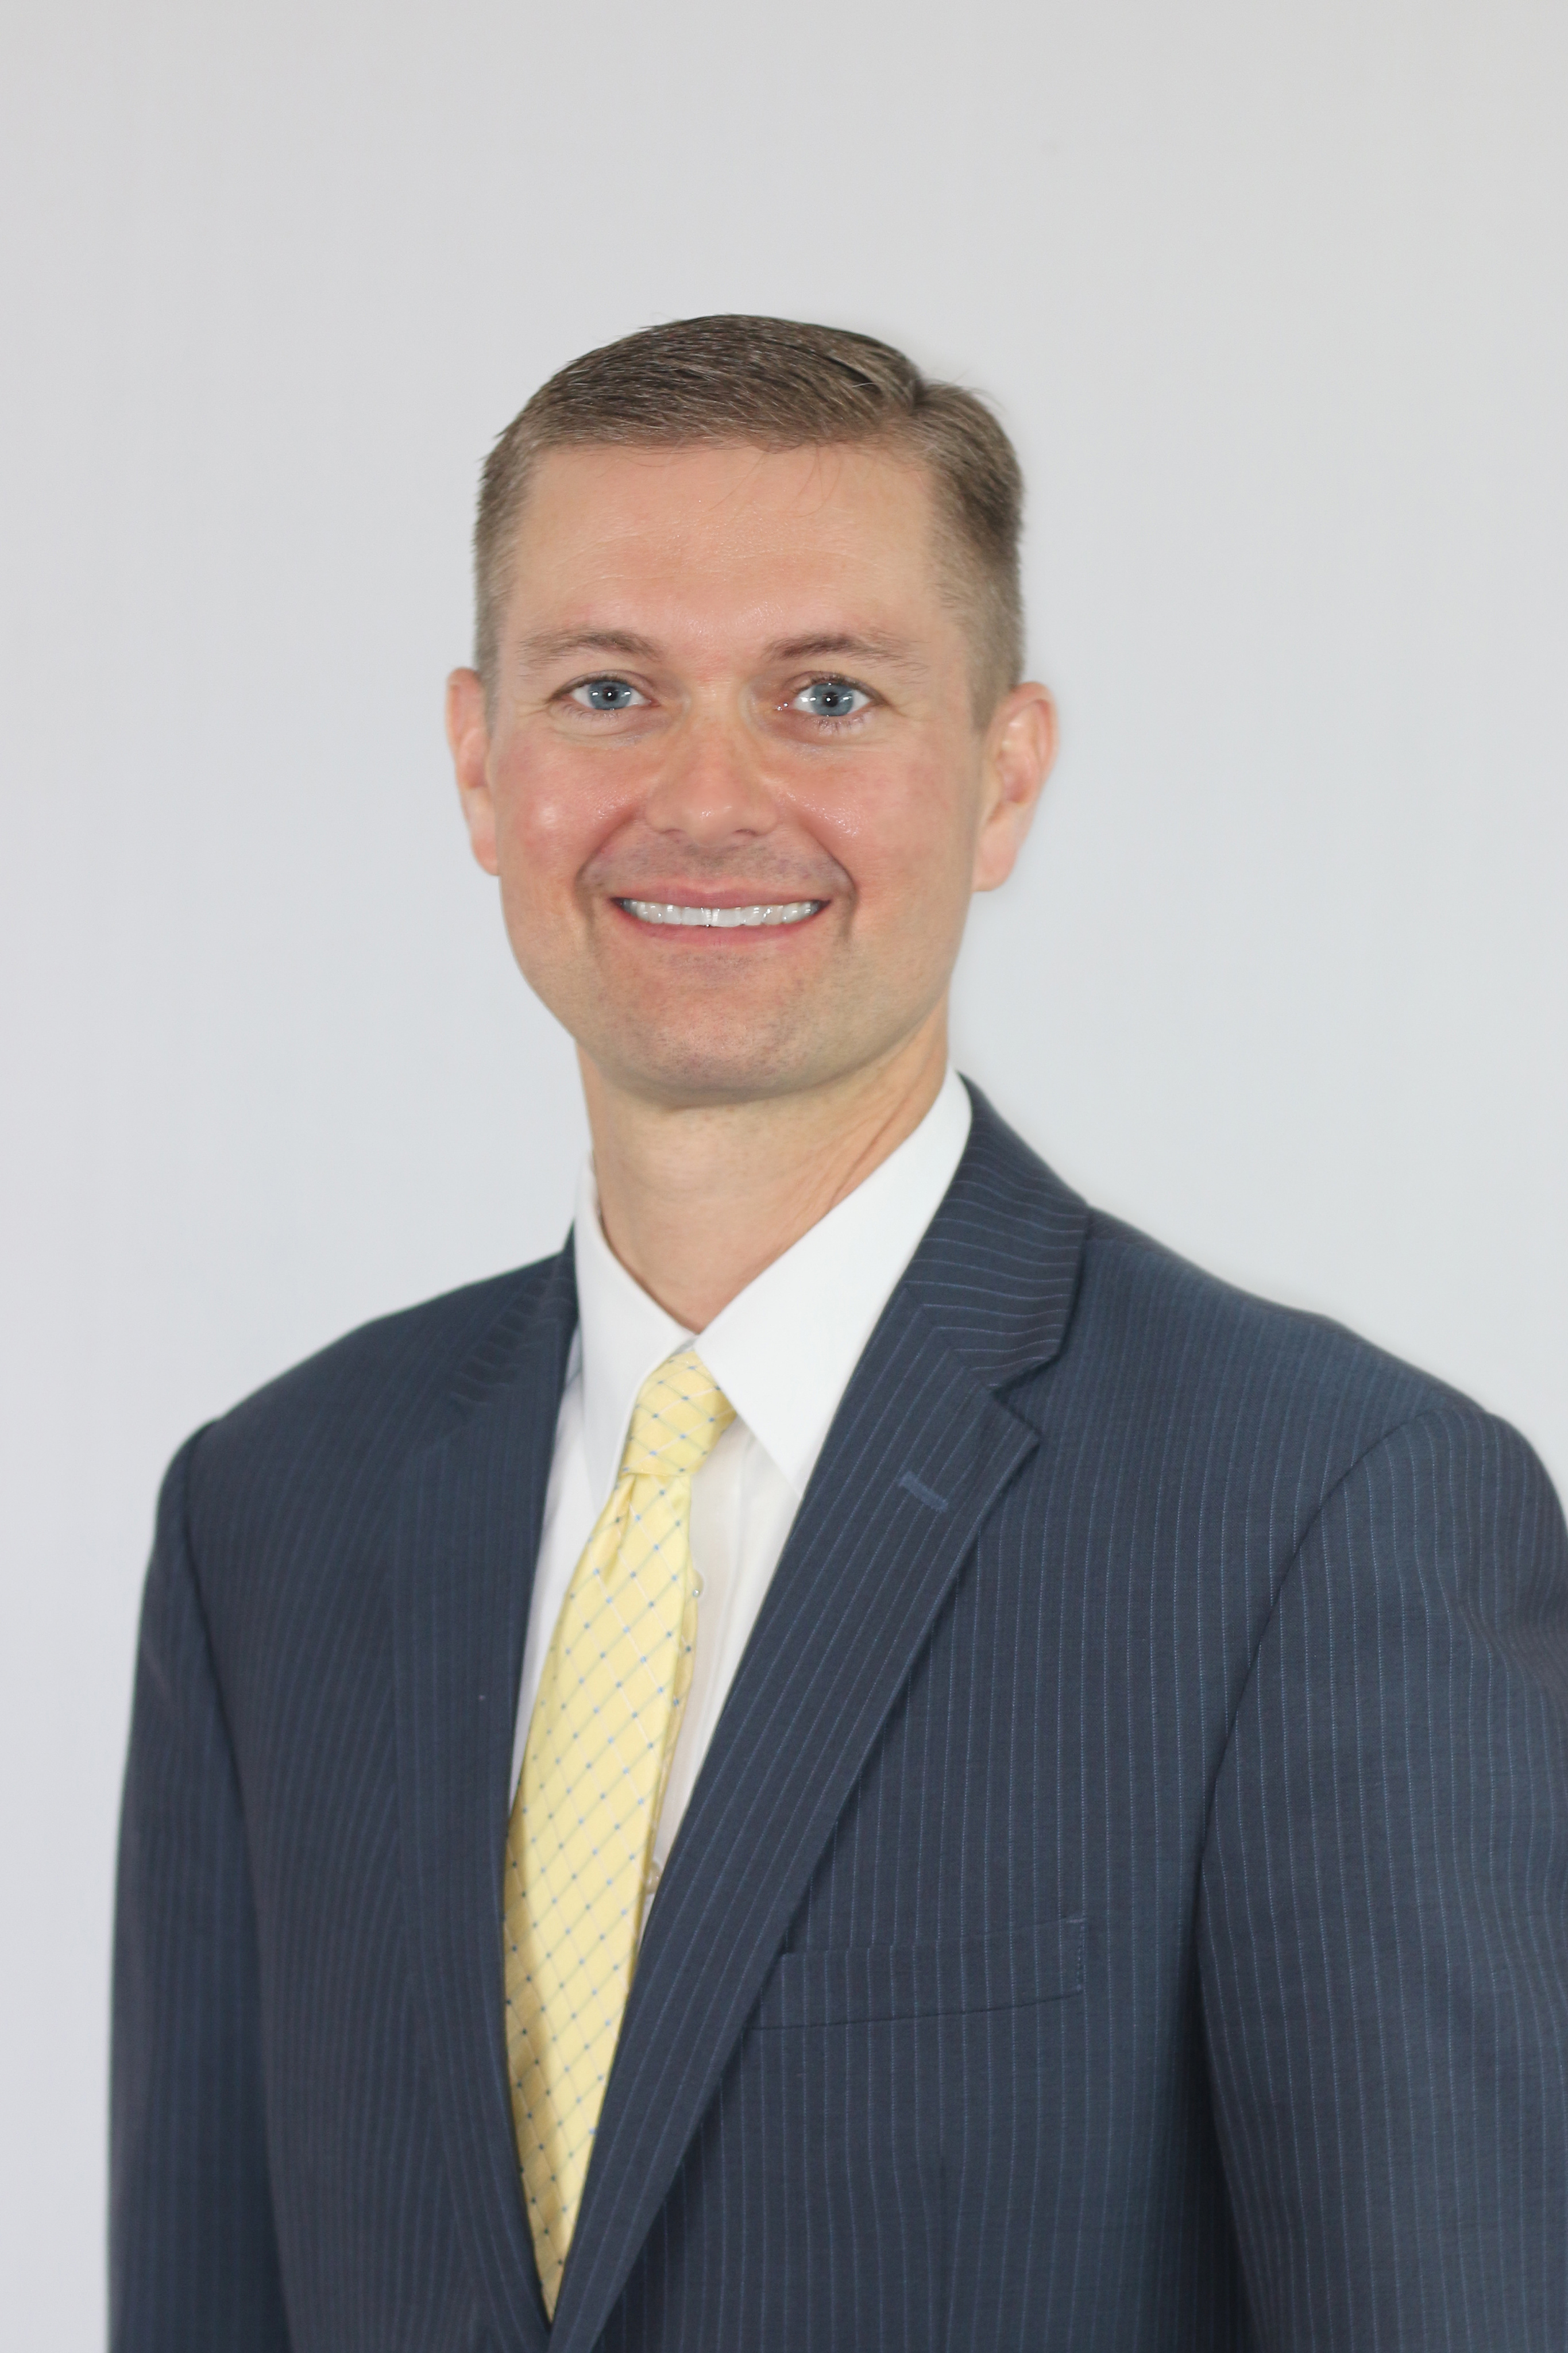 Eric D. Bednar serves as the Crestwood Stake Kentucky President of The Church of Jesus Christ of Latter-day Saints.